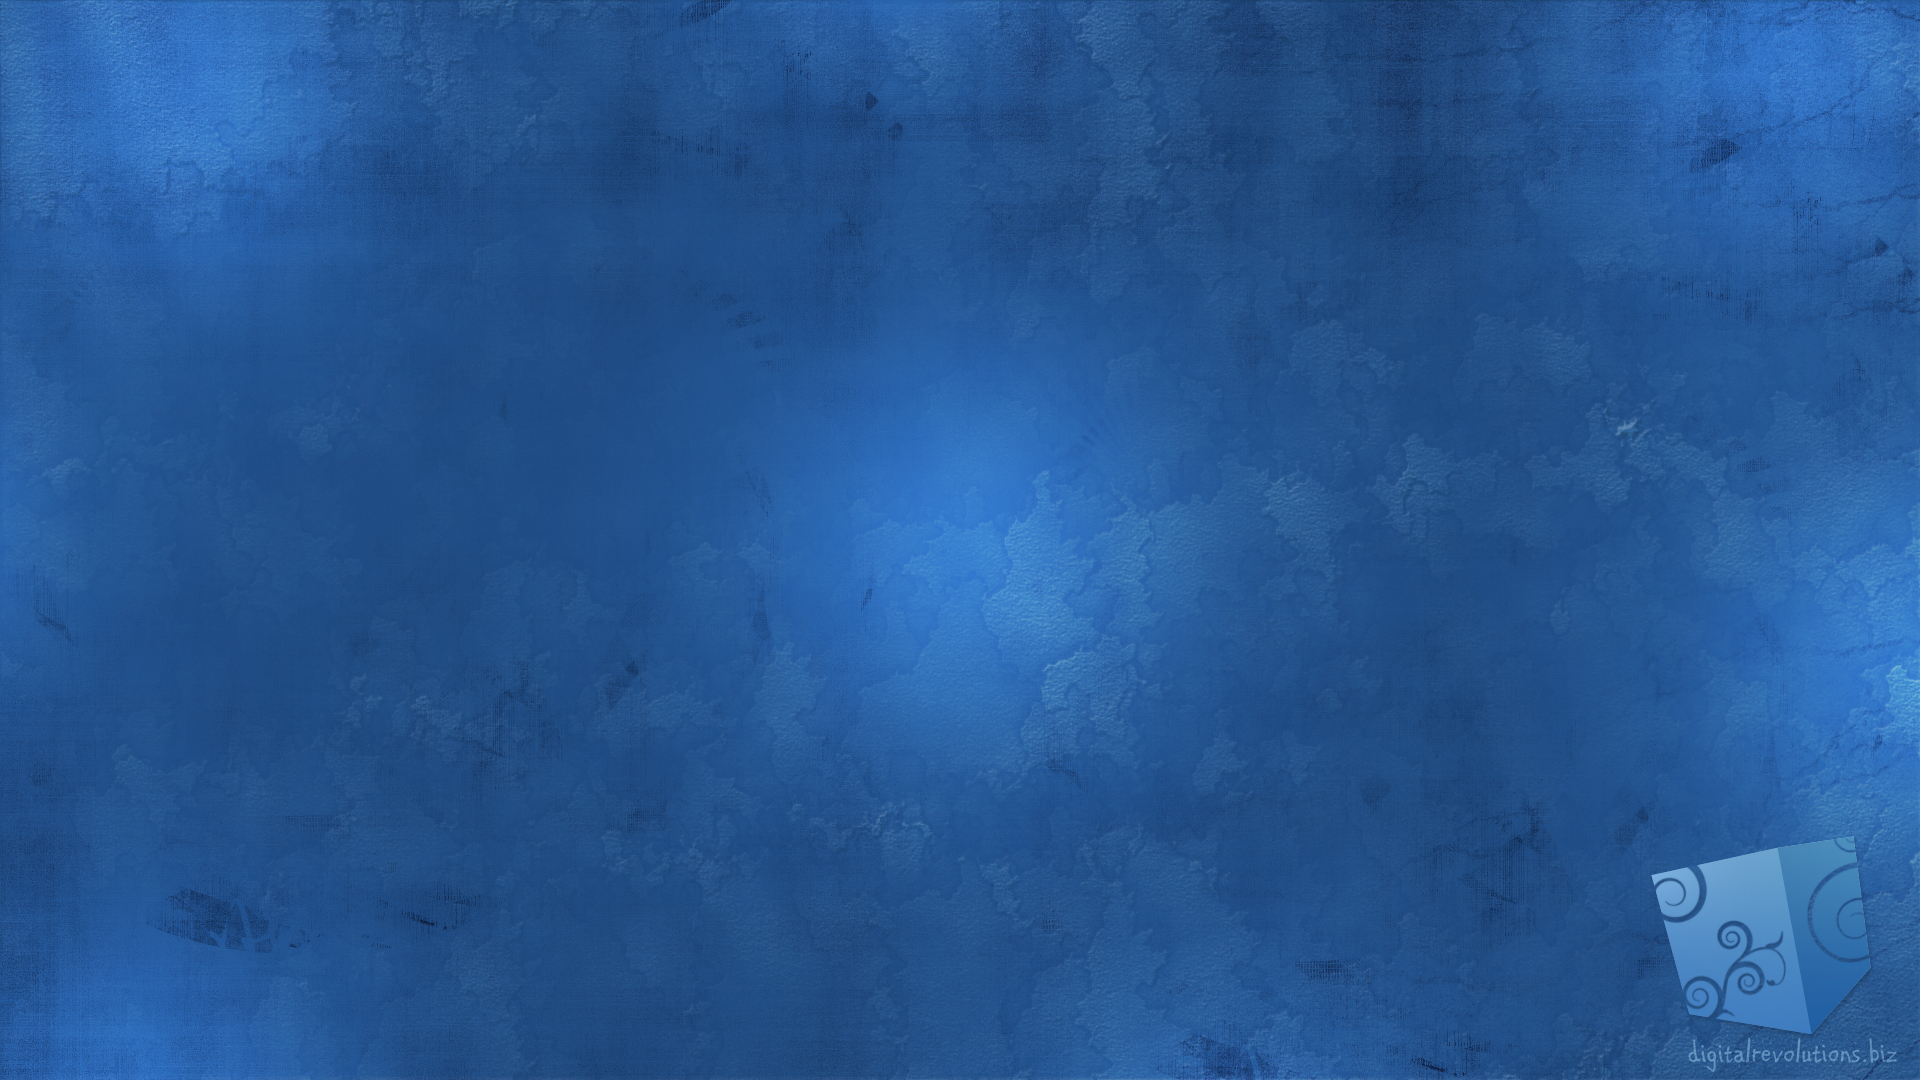 Cool Blue Free Abstract Background Digital Revolutions